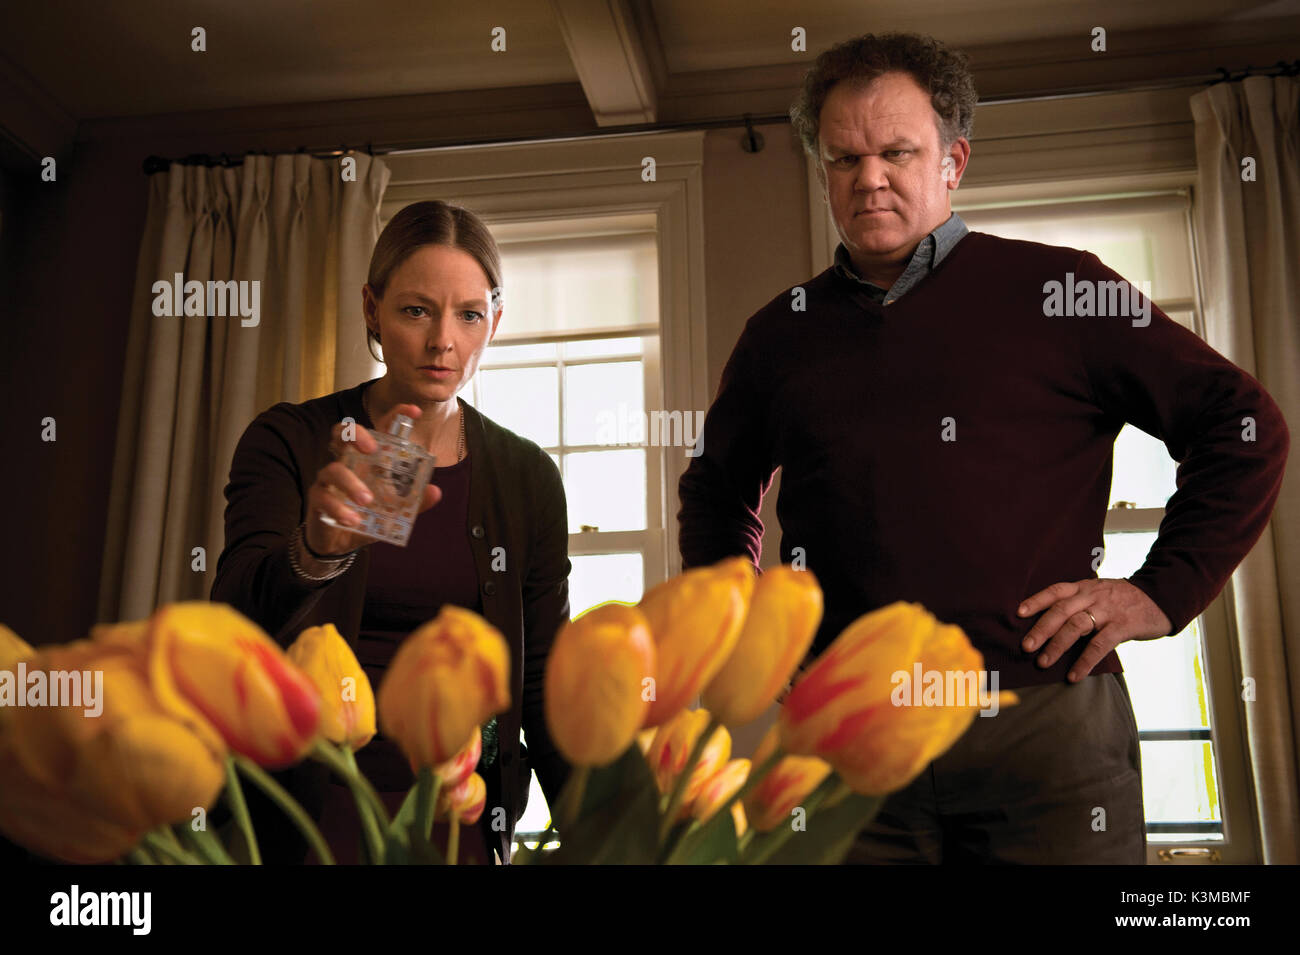 CARNAGE [FR / GER / POL / SP 2011] [L-R] JODIE FOSTER, JOHN C. REILLY     Date: 2011 Stock Photo